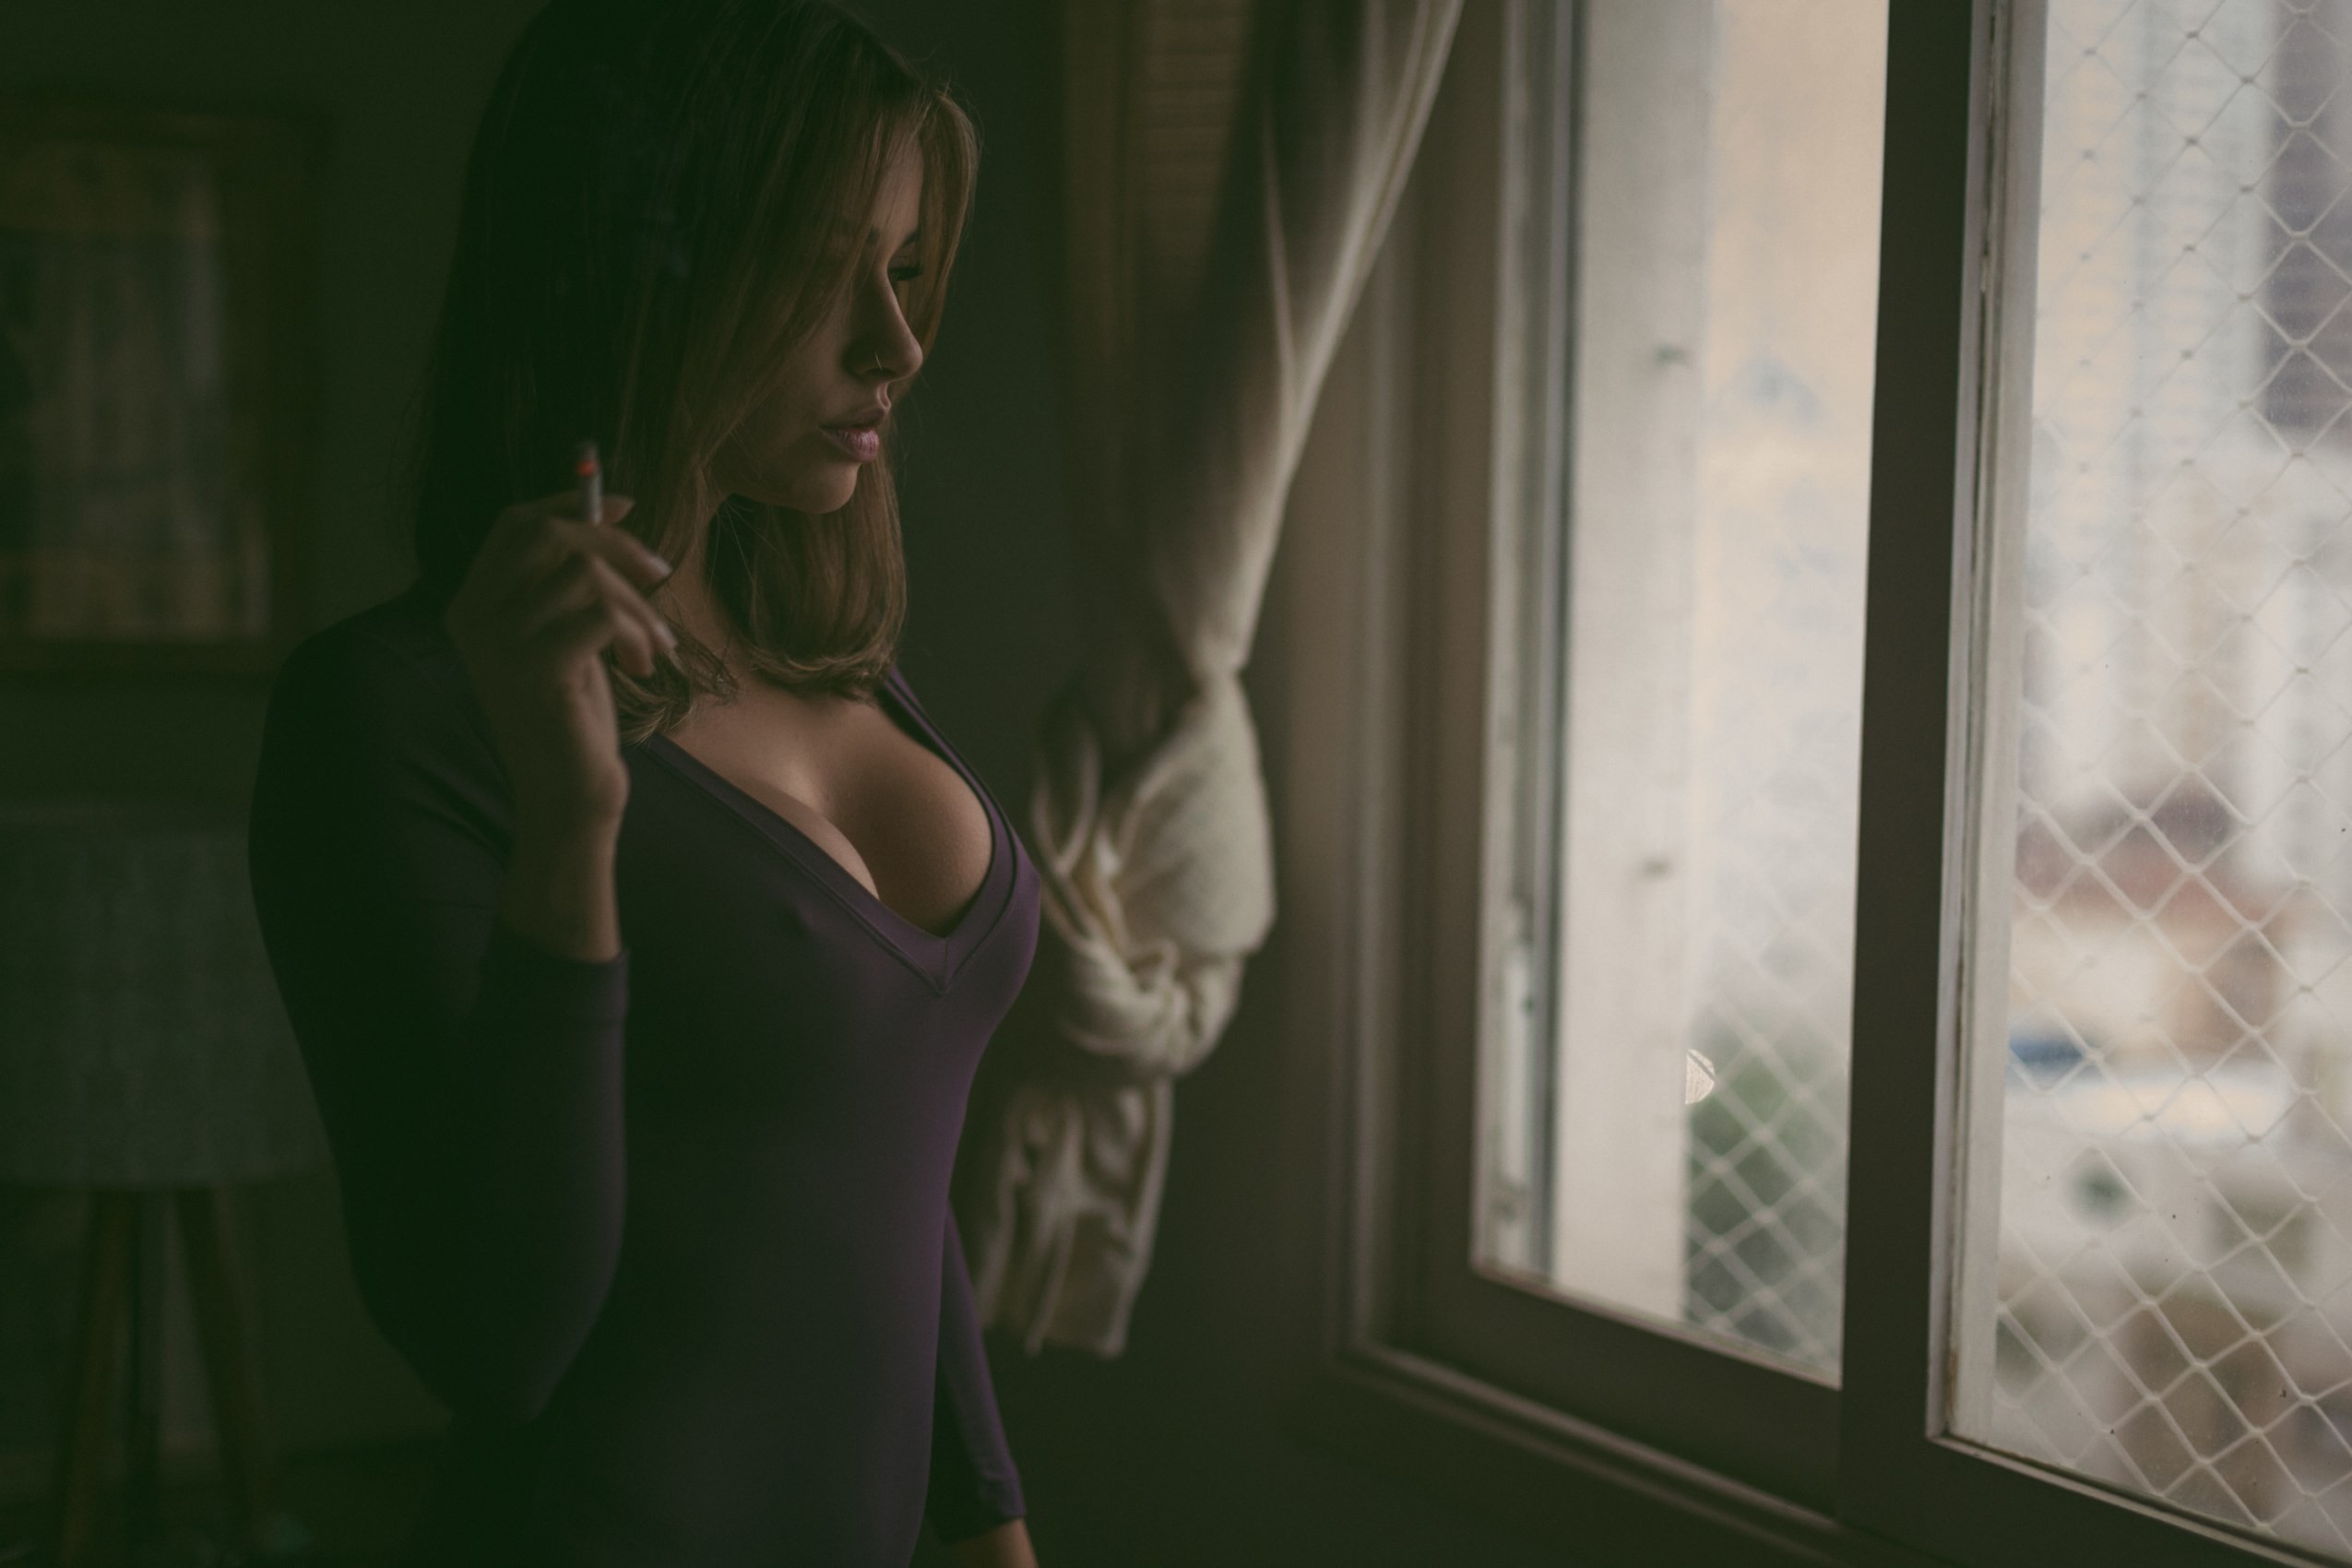 People 2550x1700 Amanda Oliveira women model indoors women indoors boobs nose ring by the window window looking out window nipple bulge purple clothing lipstick